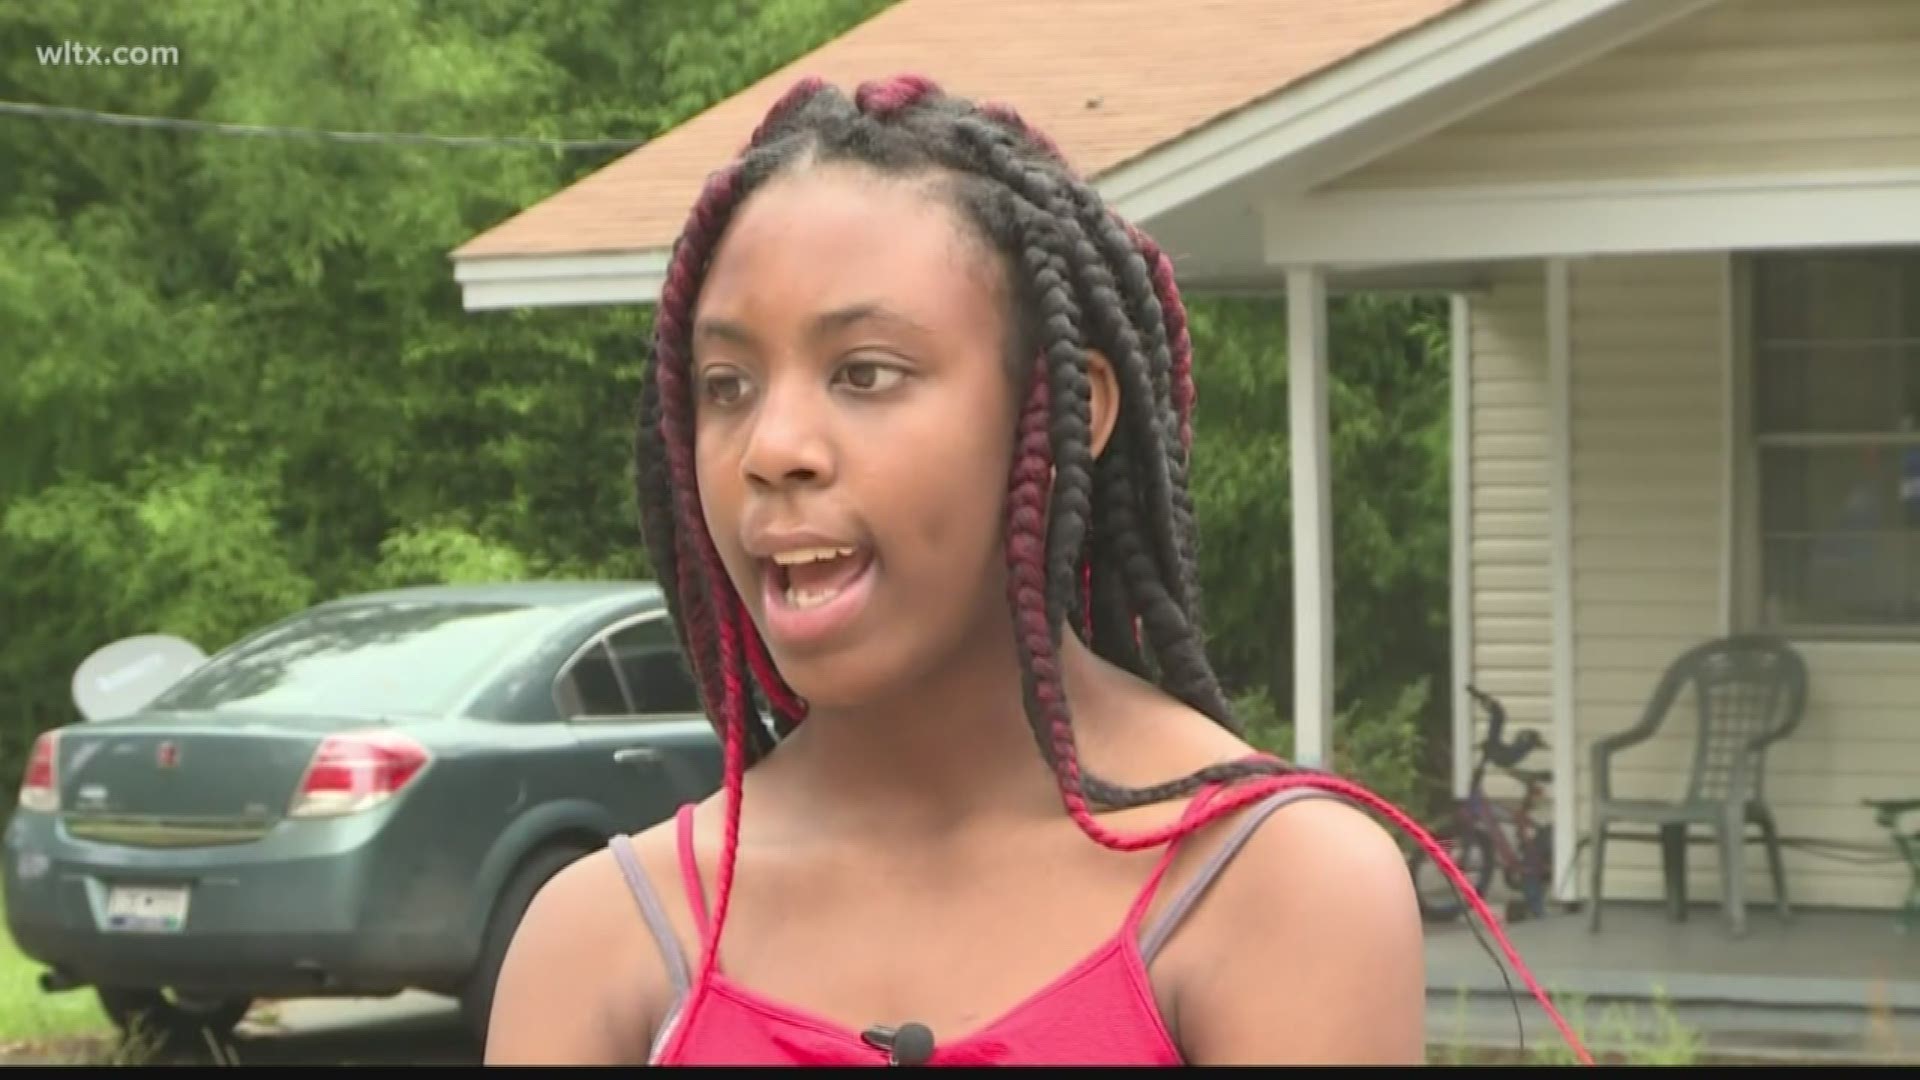 Ah'laya Scriven says she saw a bolt of lightning and it struck her window. She was inside on her bed when she says lightning hit her.